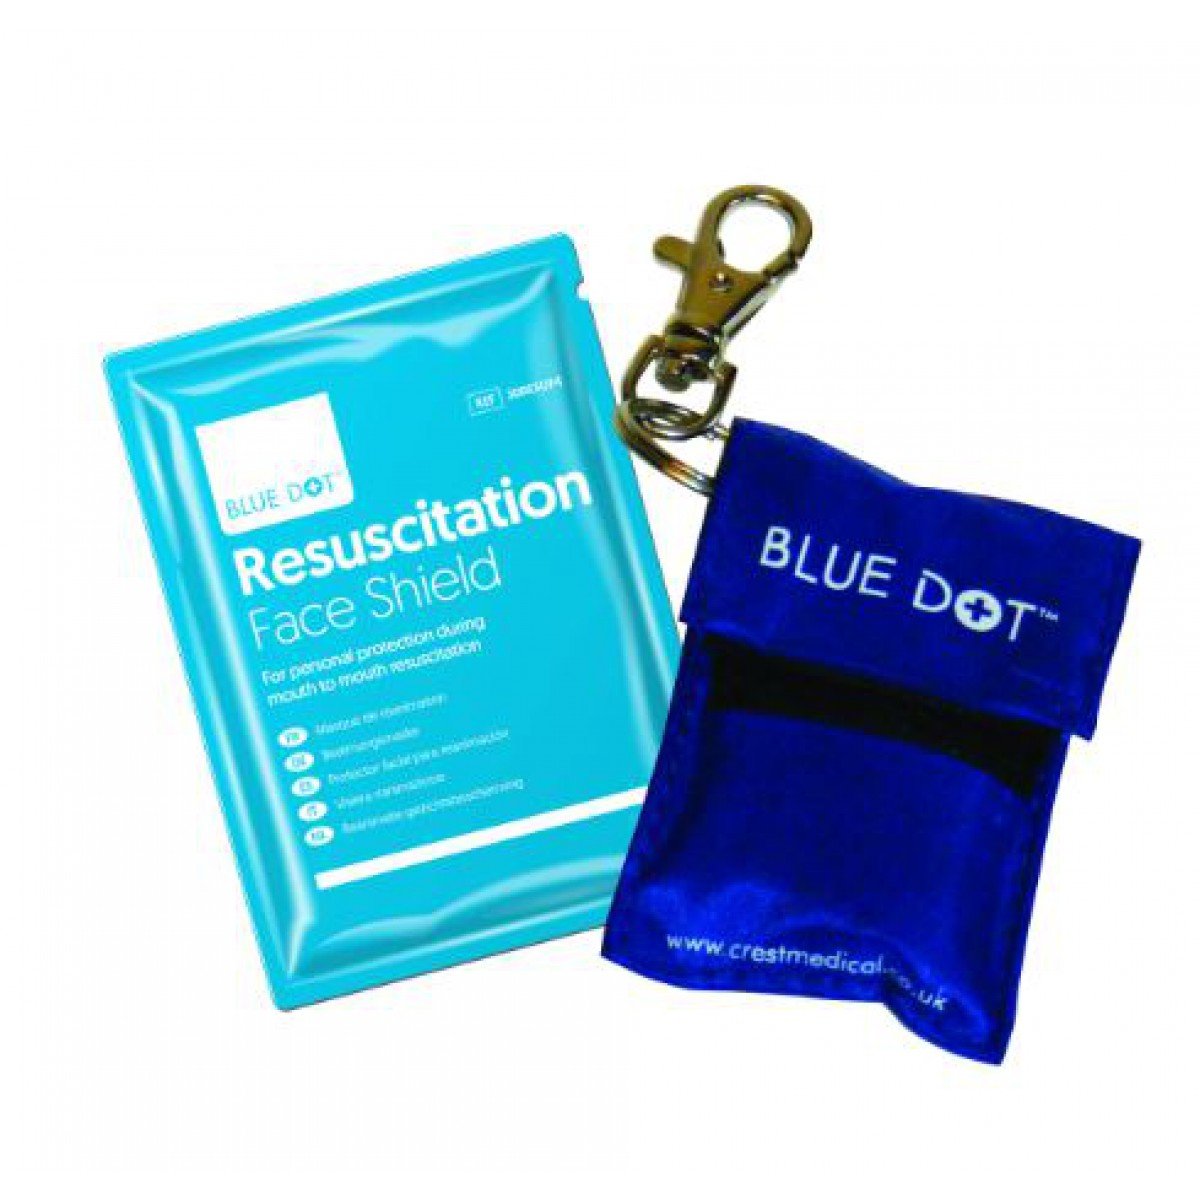 Resuscitation Face Shield Keyring Pouch Blue One Size